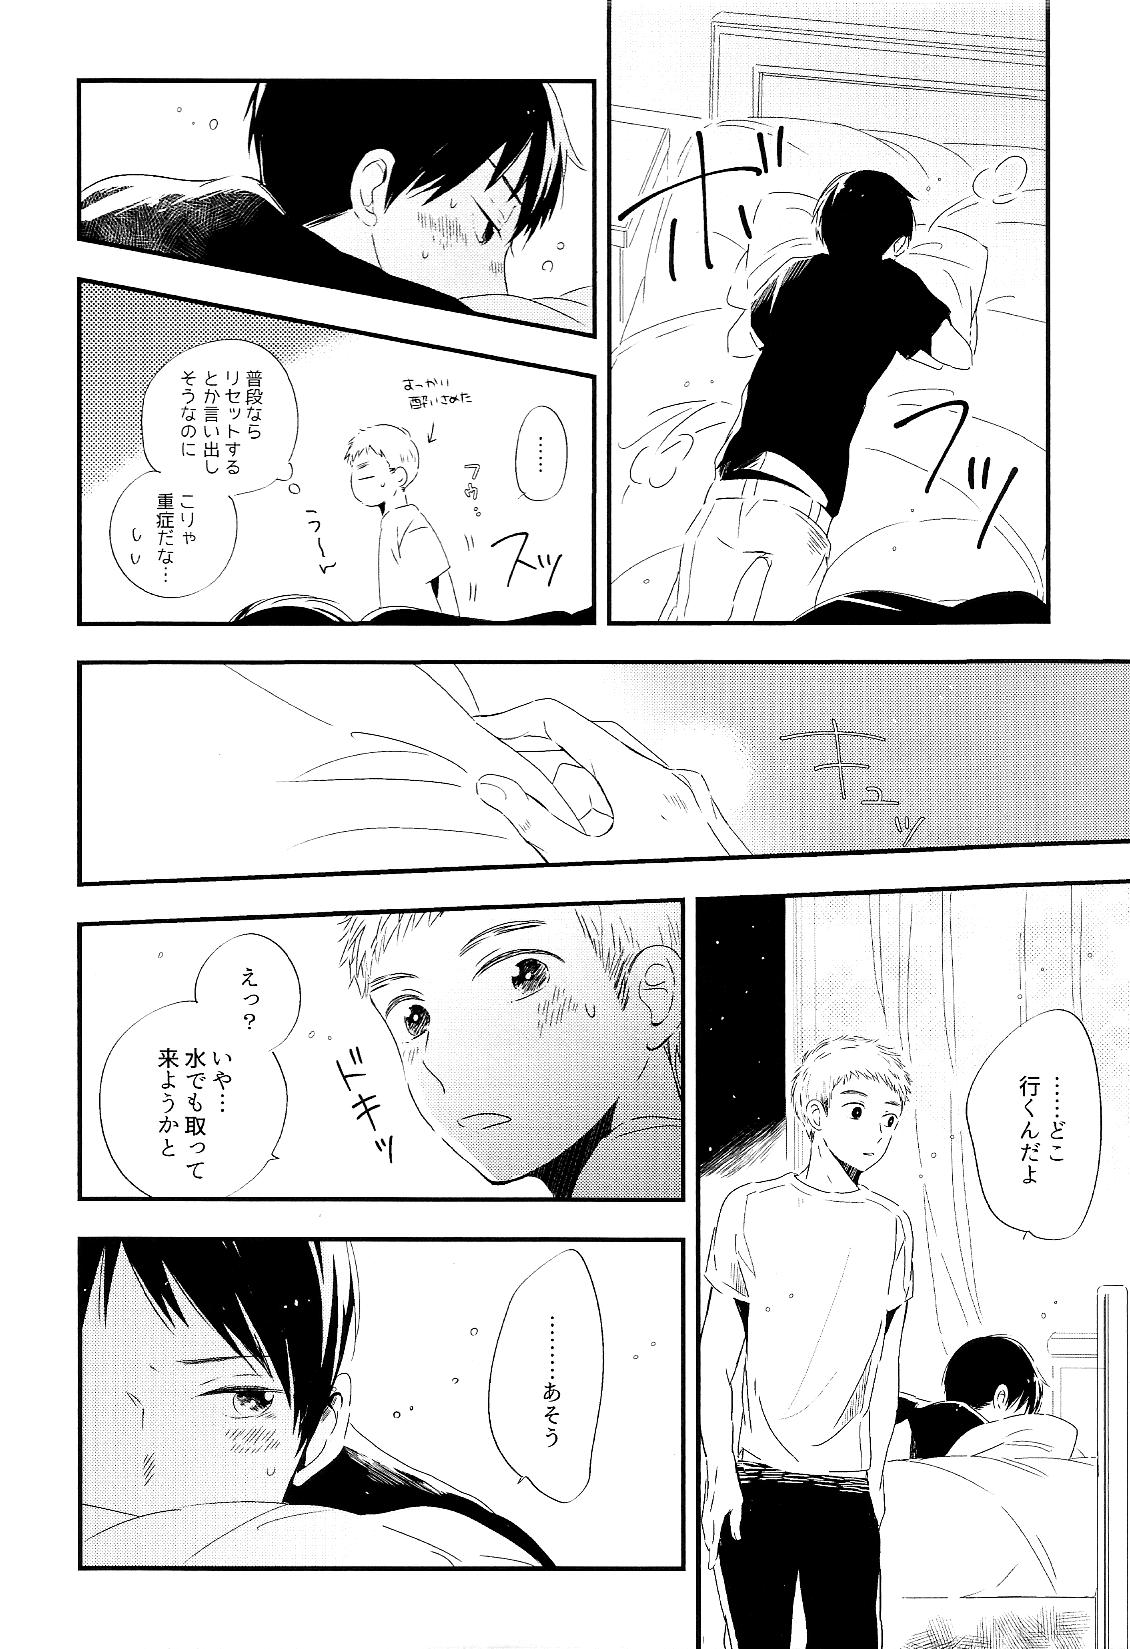 Buttplug 永井が酔っ払いまして。 - Ajin Students - Page 4